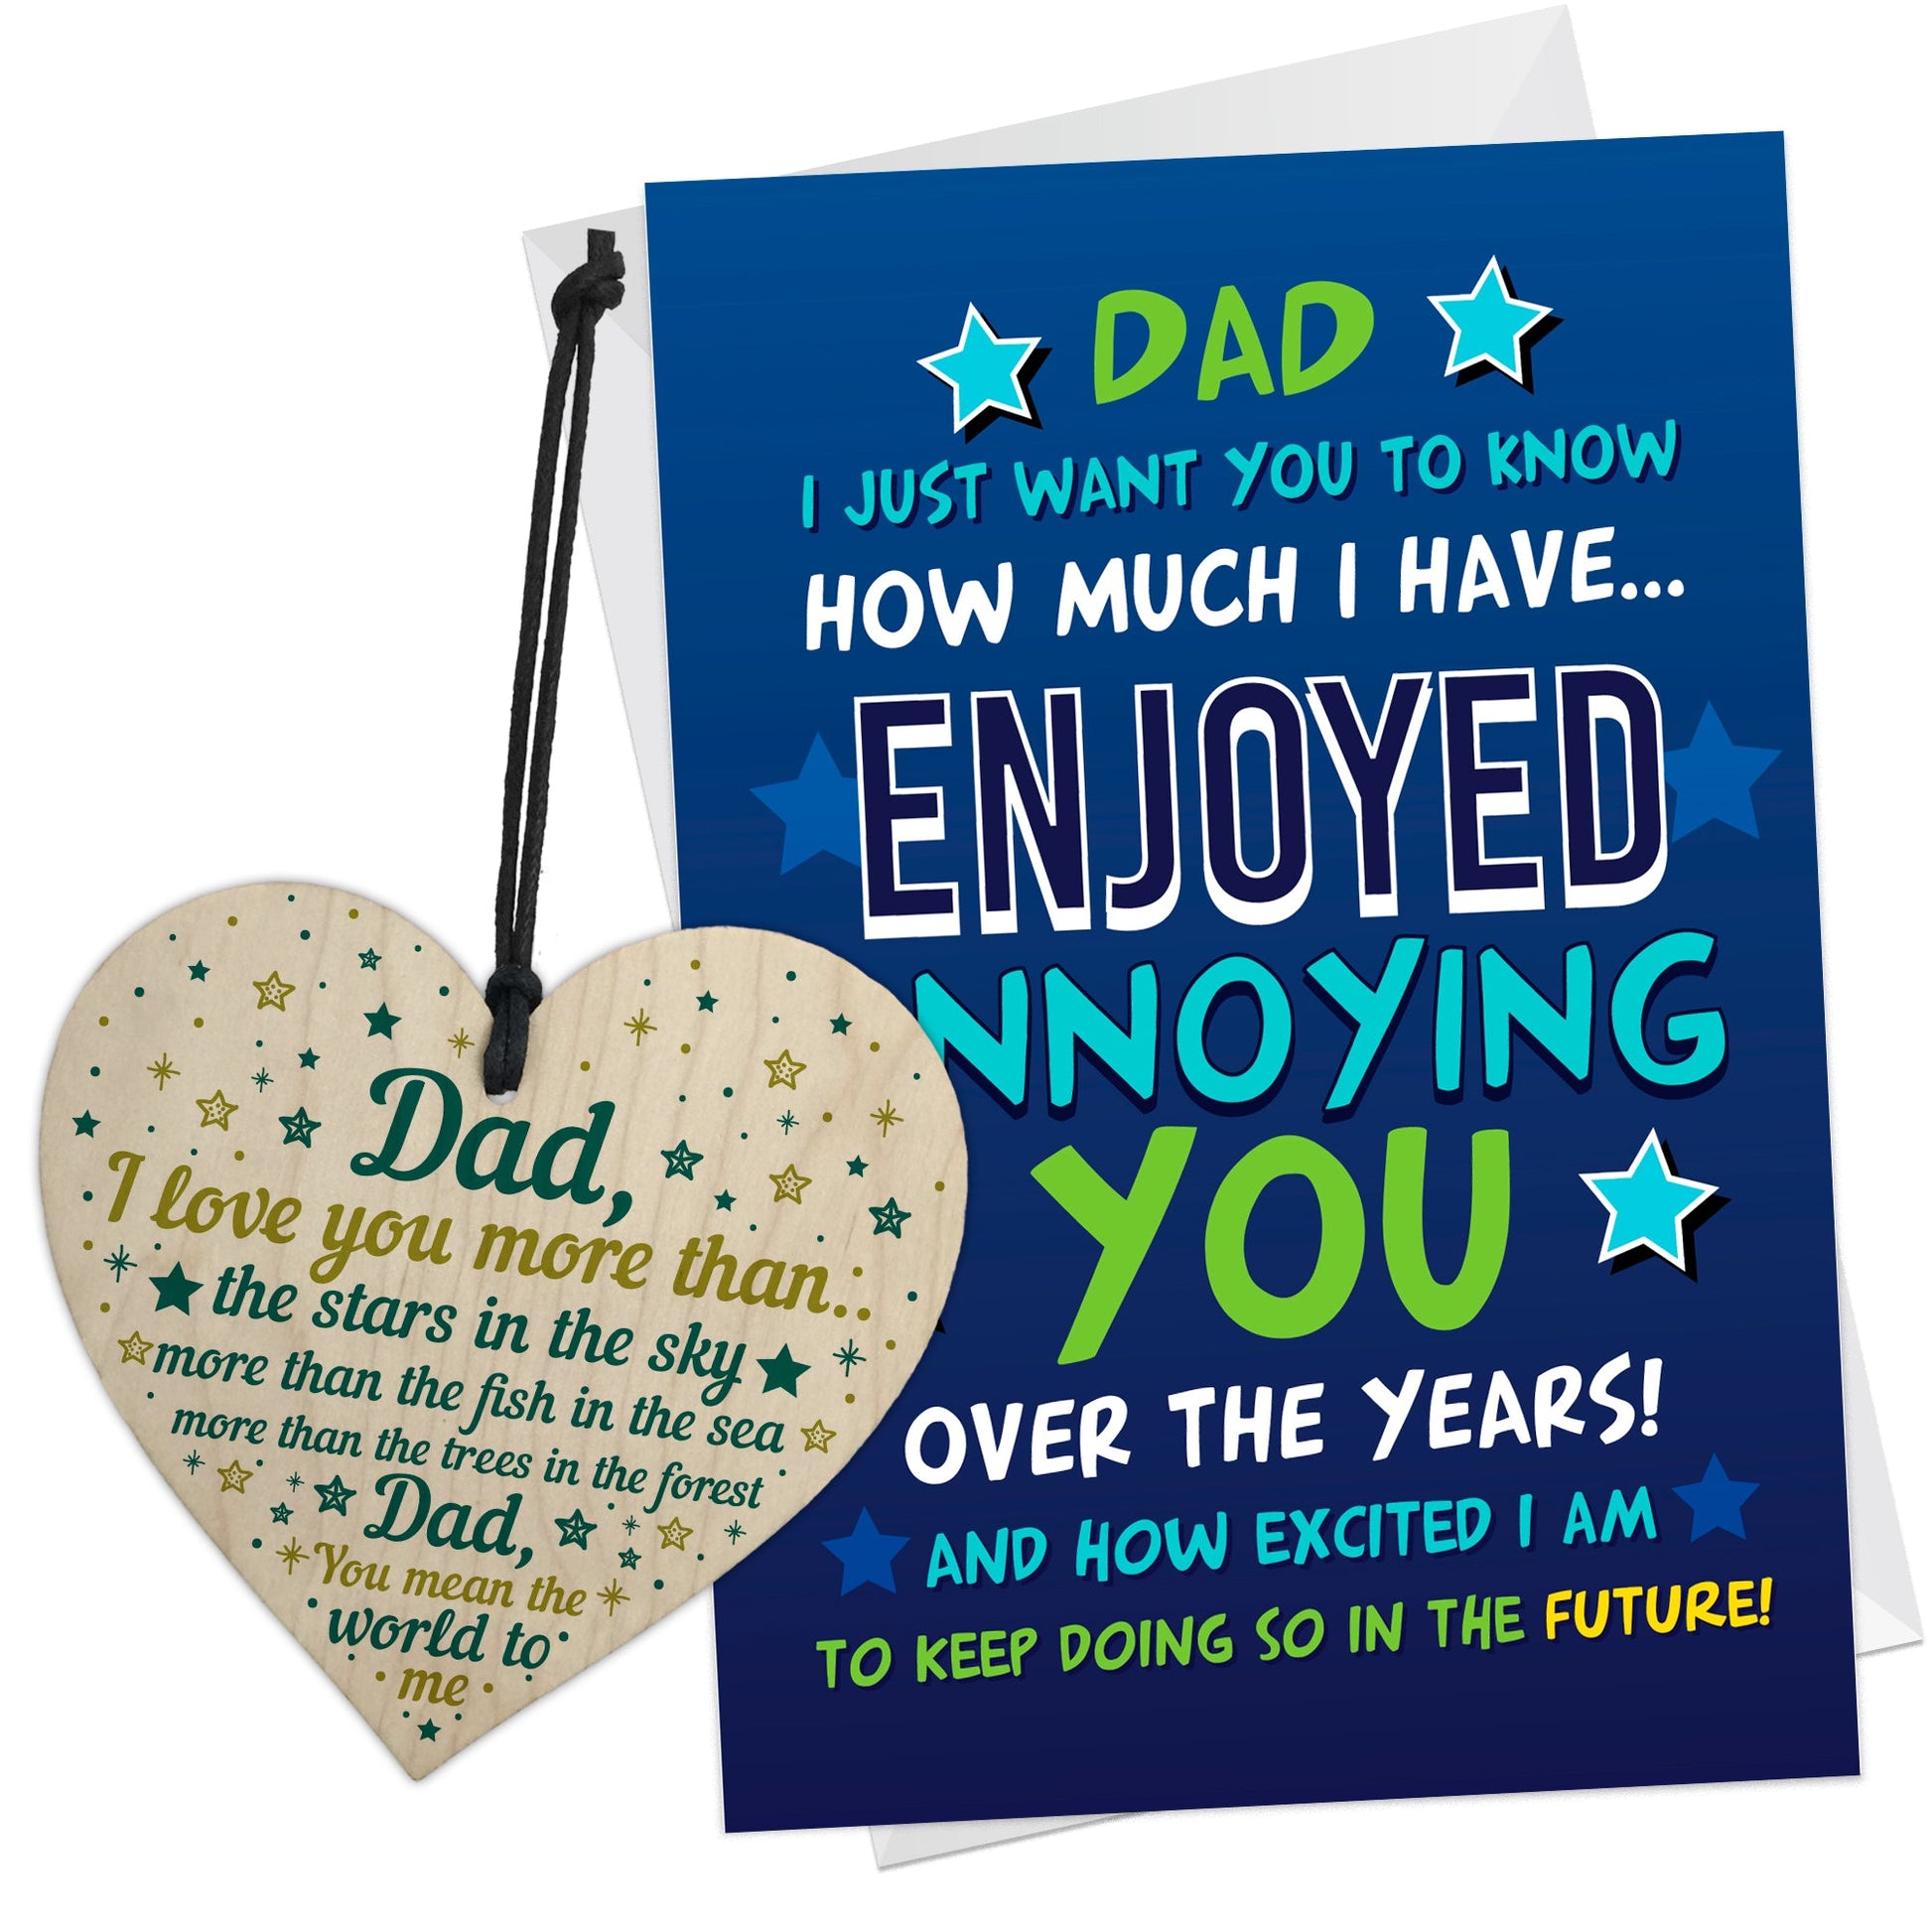 Dad and Daughter Fishing Birthday Card